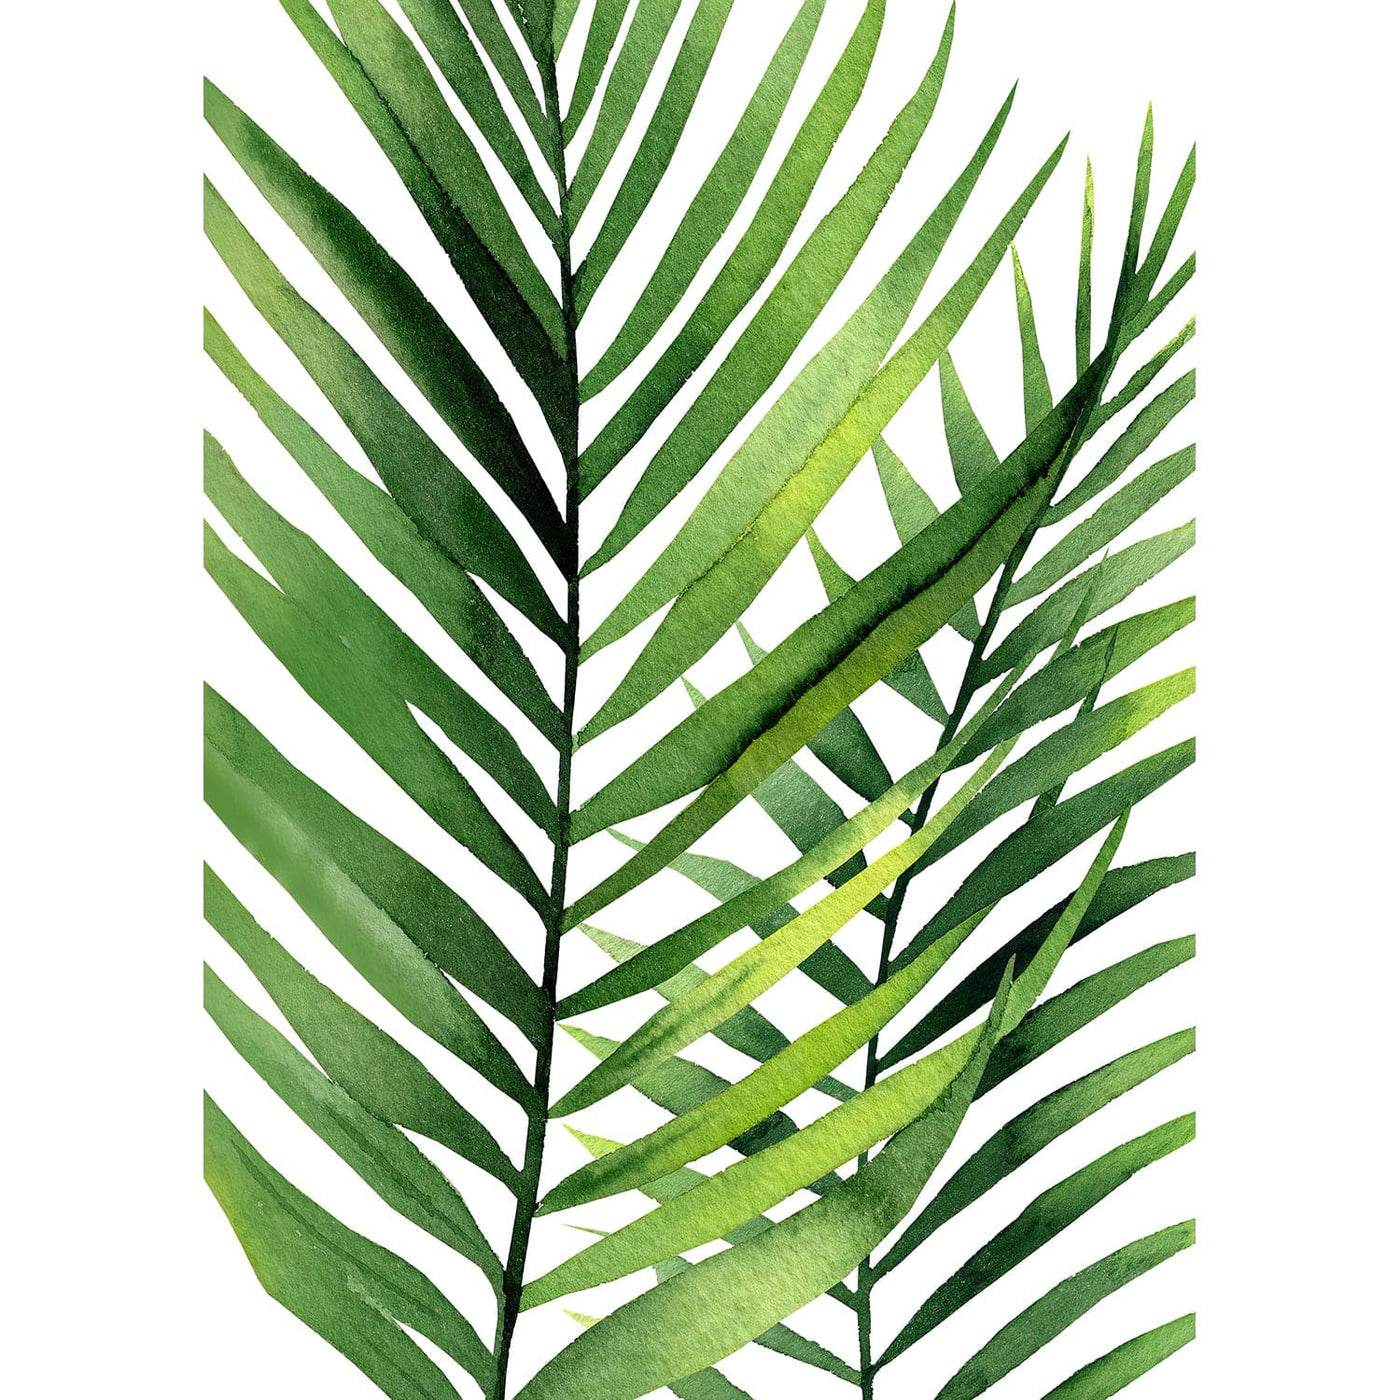 Kentia Palm Leaves Wall Art Print from our Australian Made Framed Wall Art, Prints & Posters collection by Profile Products Australia